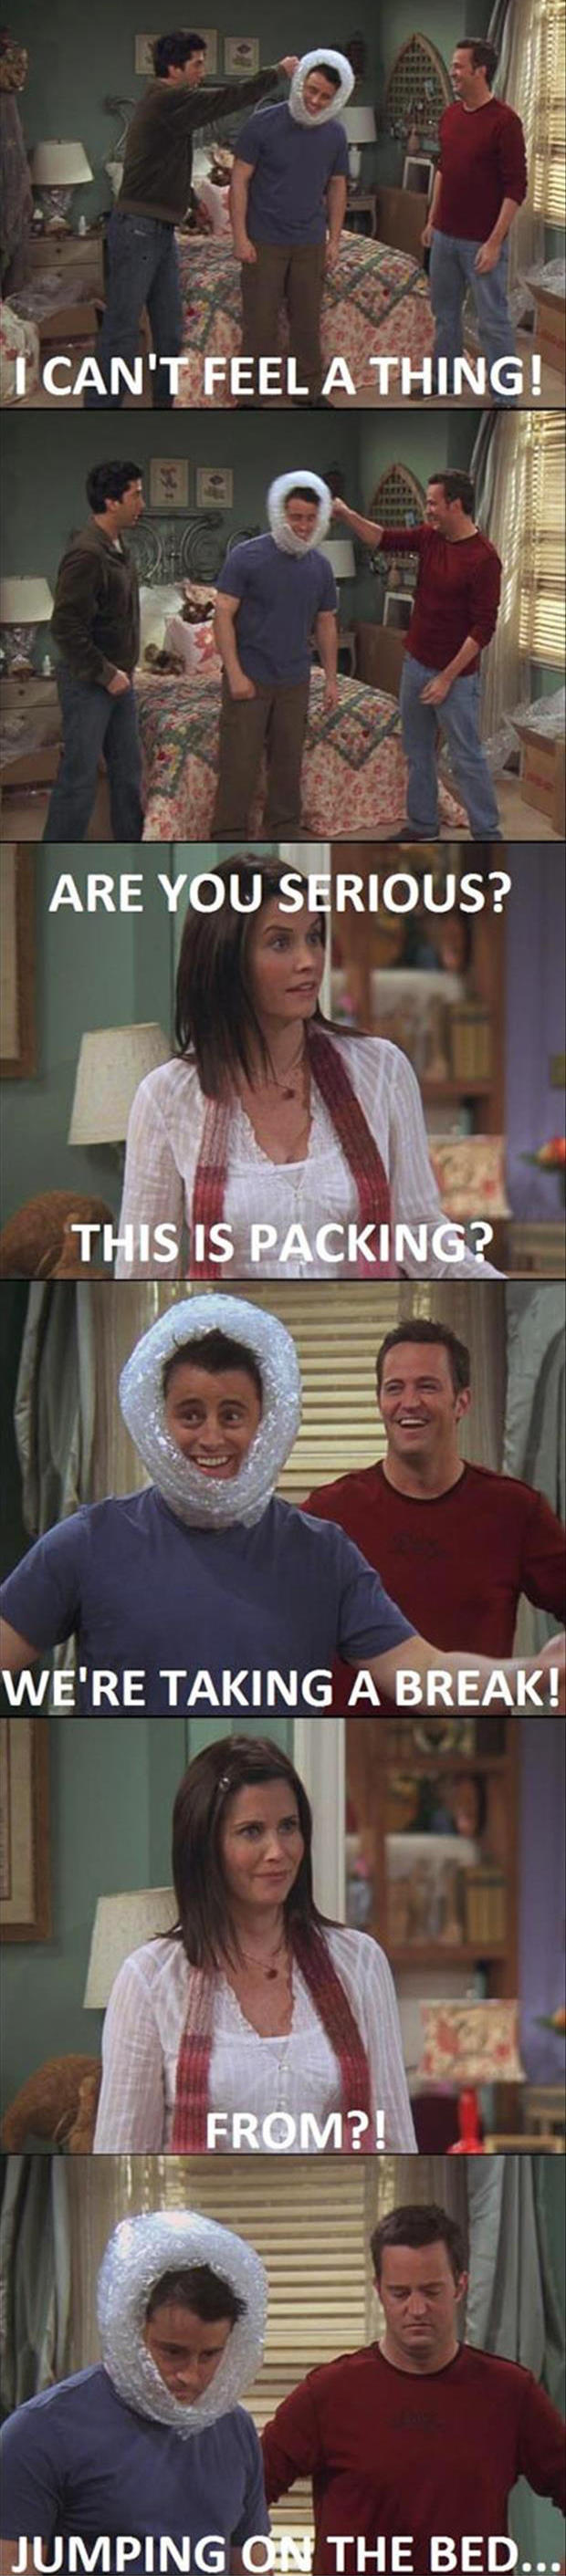 When Chandler & Joey Played With Bubblewrap - meme